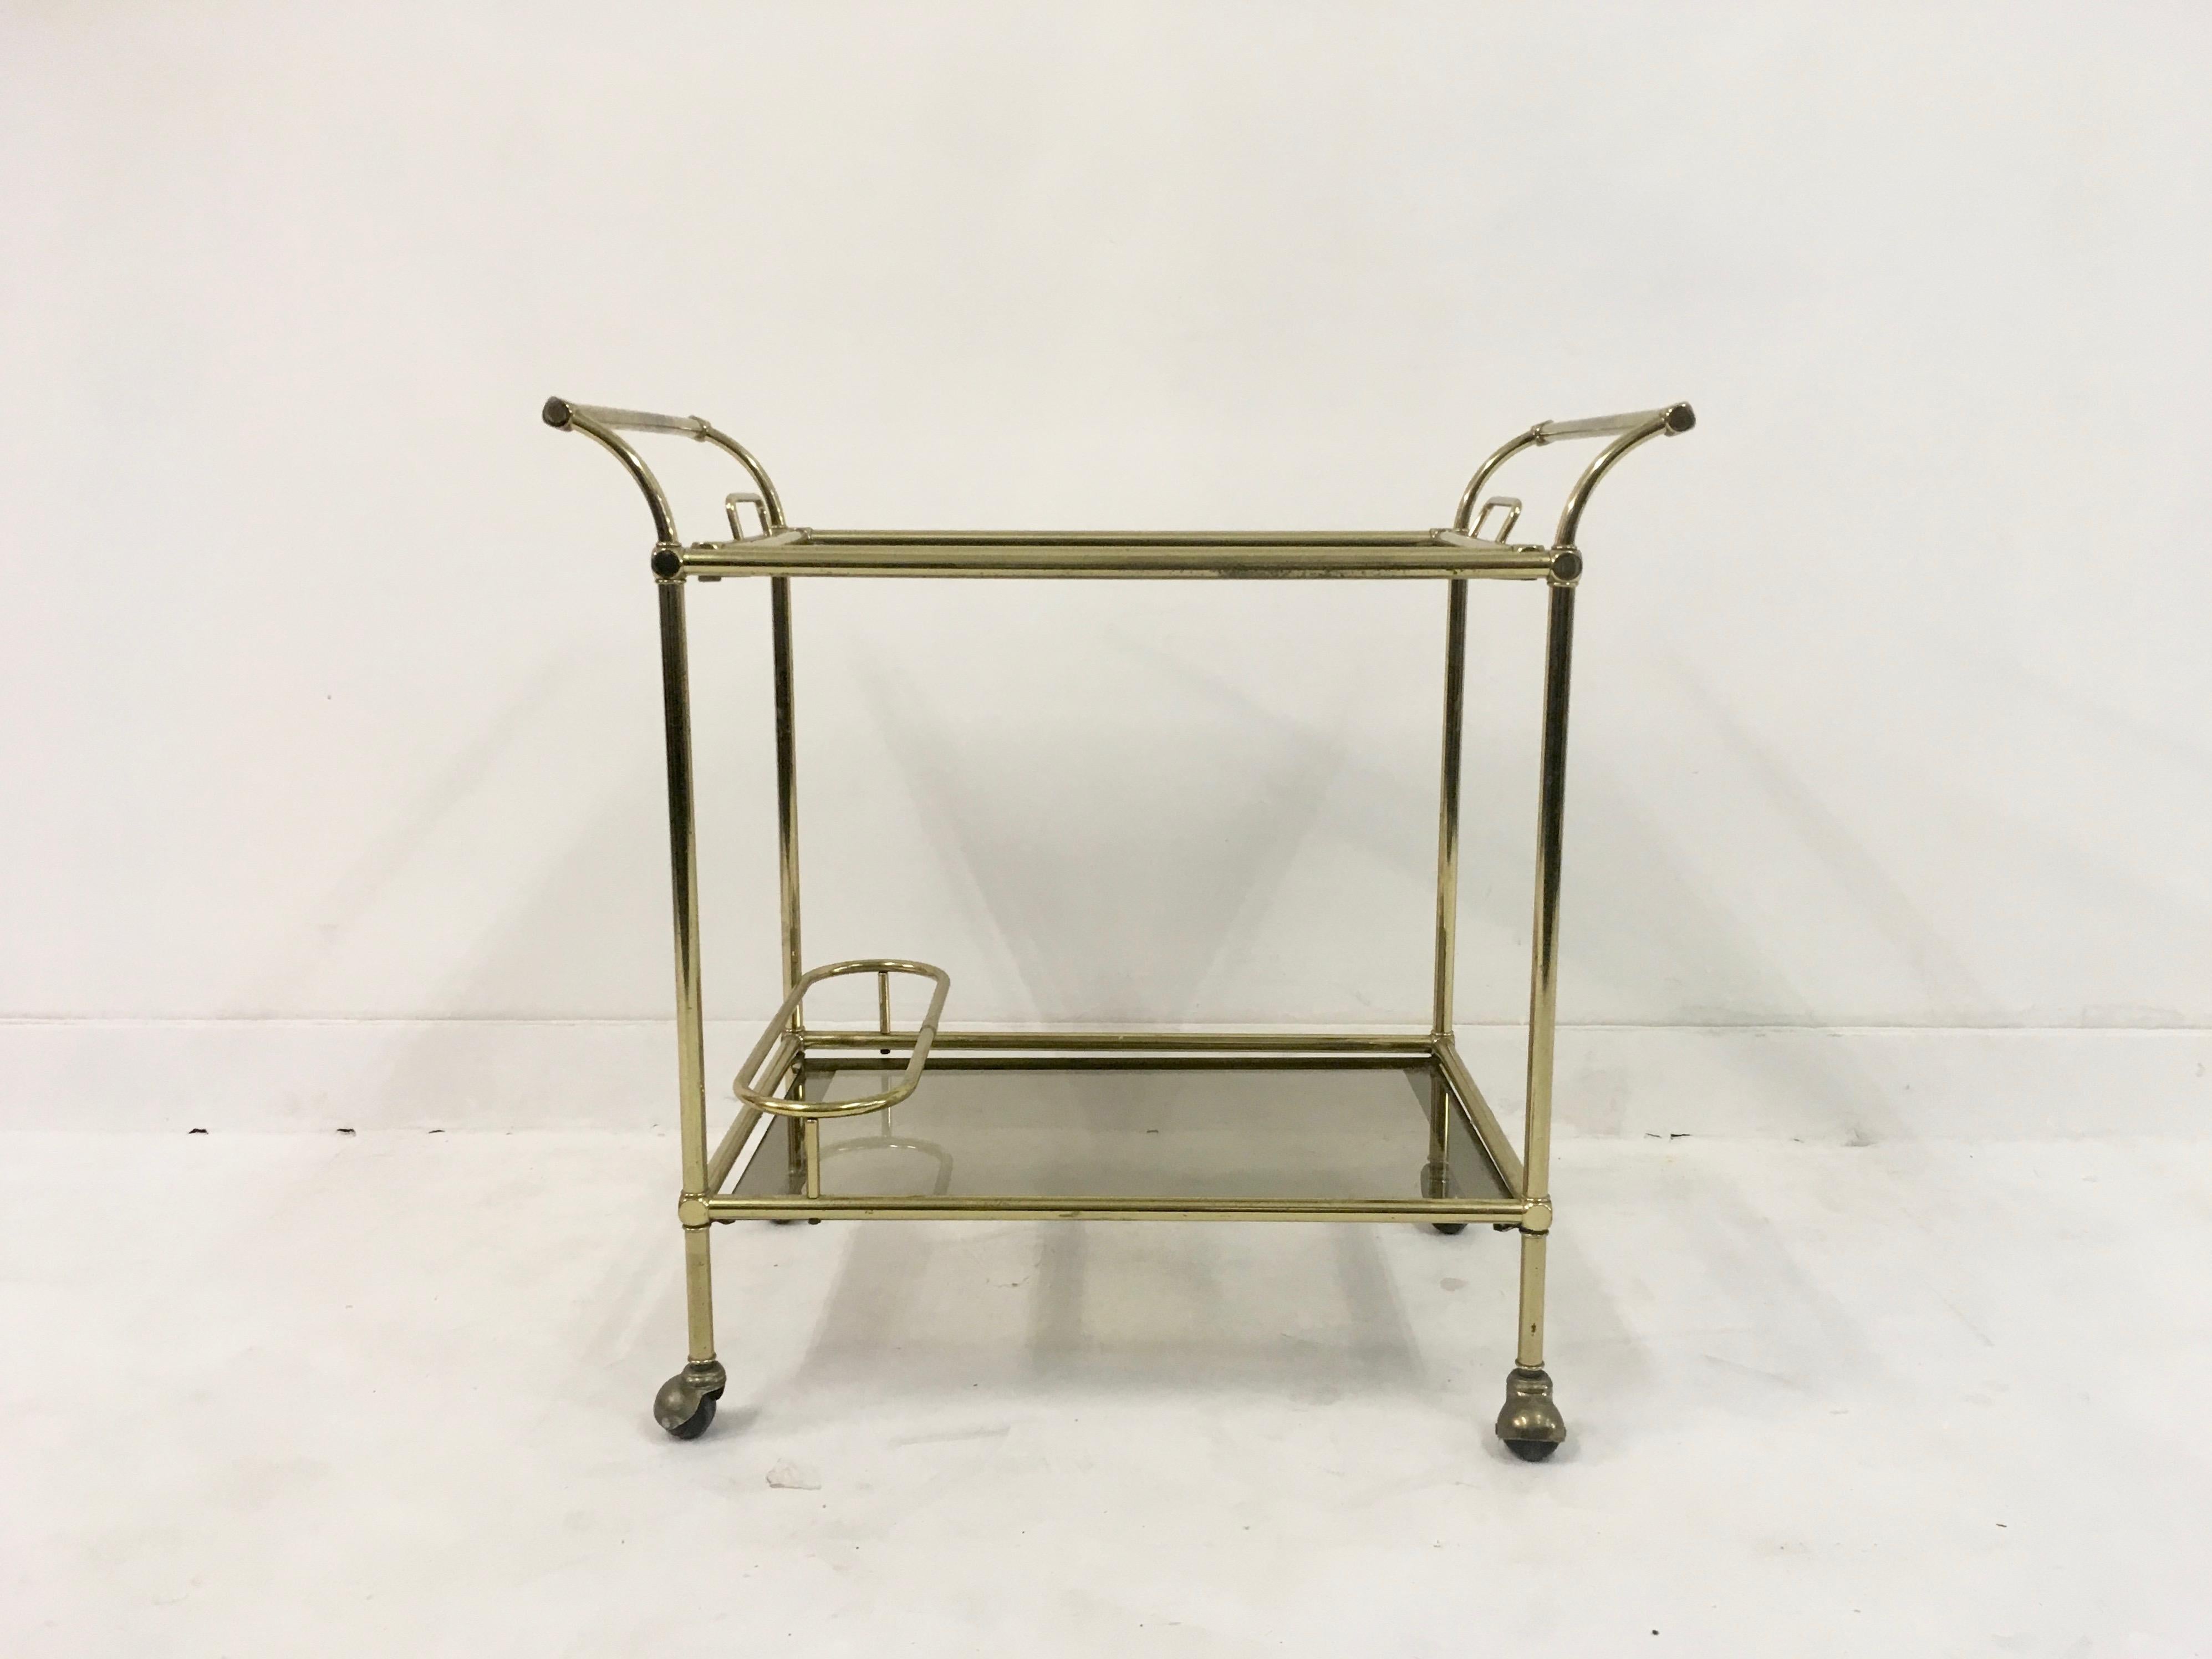 Drinks trolley or bar cart

Brass frame

Removable tray

Silver edged glass

Chip to corner of bottom shelf

Italy, 1970s.